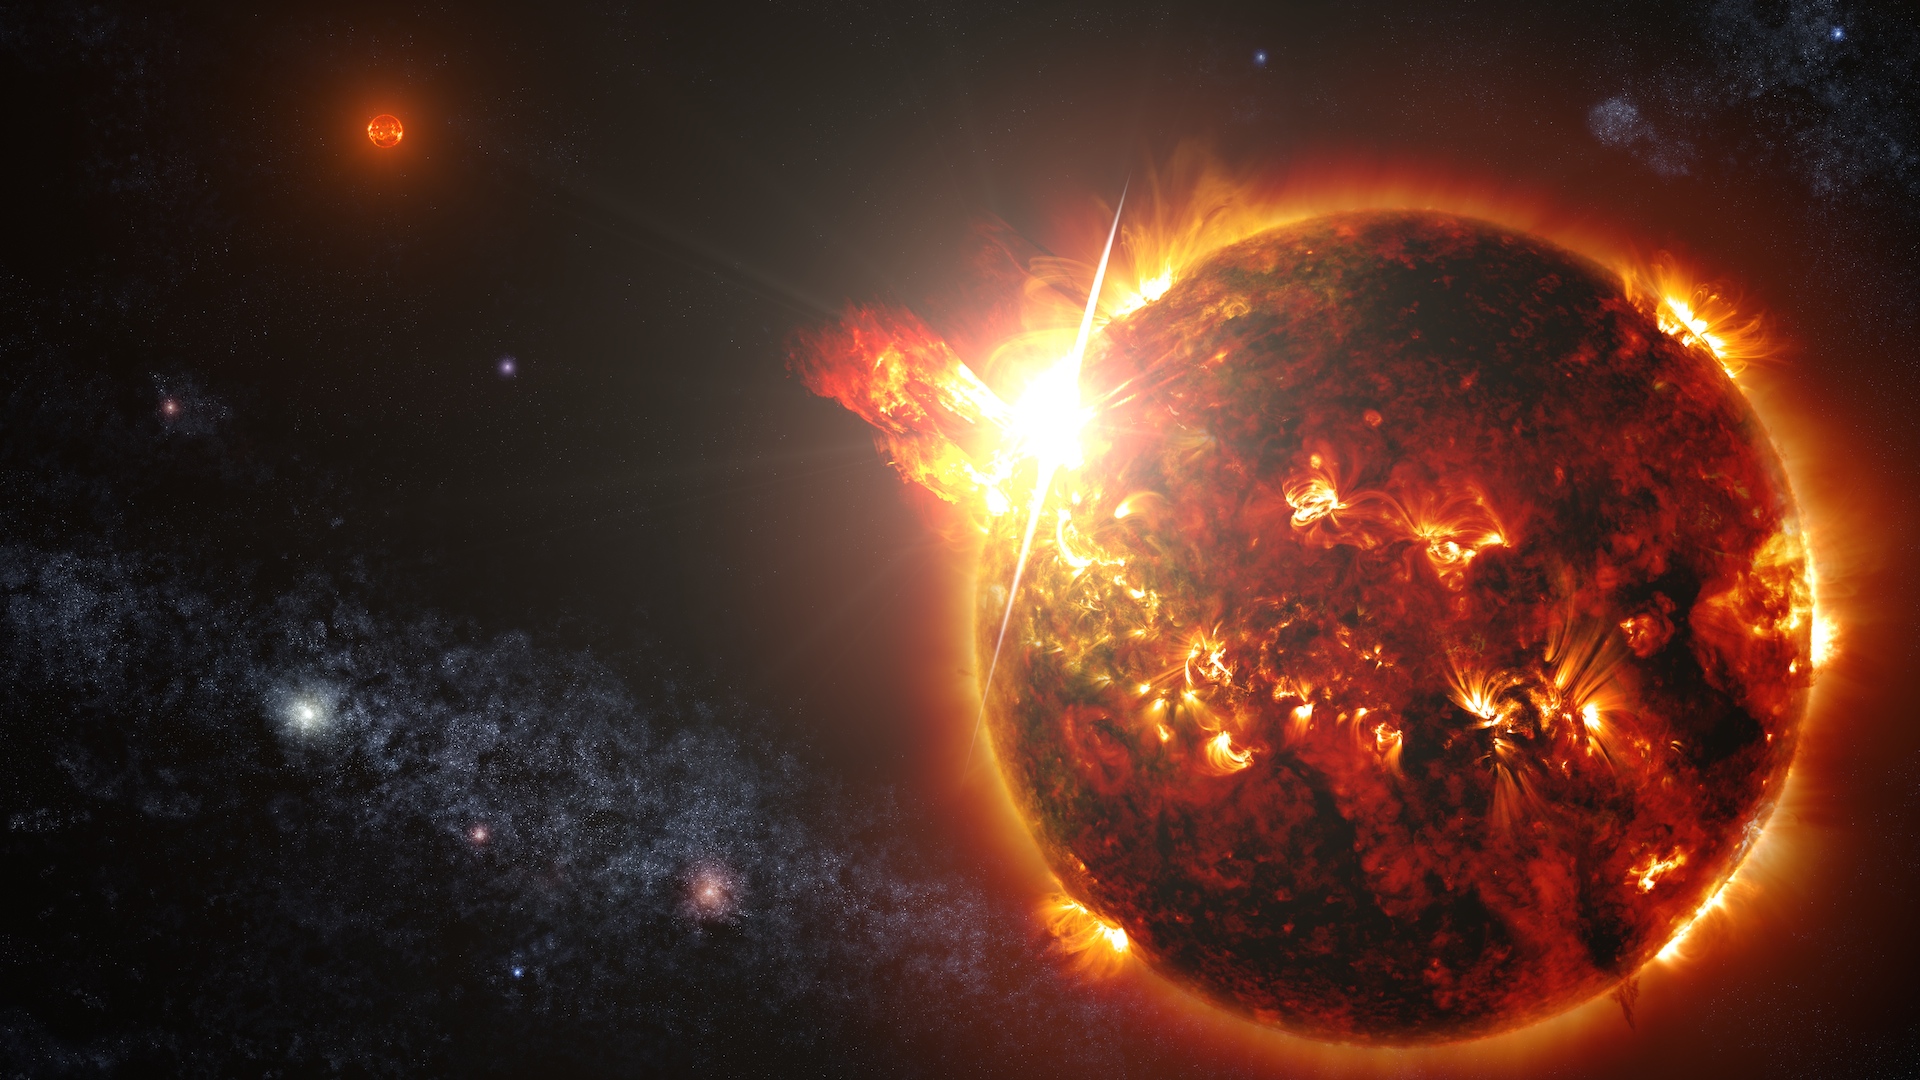 NASA's Swift mission detected a record-setting series of X-ray flares unleashed by DG CVn, a nearby binary consisting of two red dwarf stars, illustrated here. At its peak, the initial flare was brighter in X-rays than the combined light from both stars at all wavelengths under normal conditions. Credit: NASA's Goddard Space Flight Center/S. Wiessinger